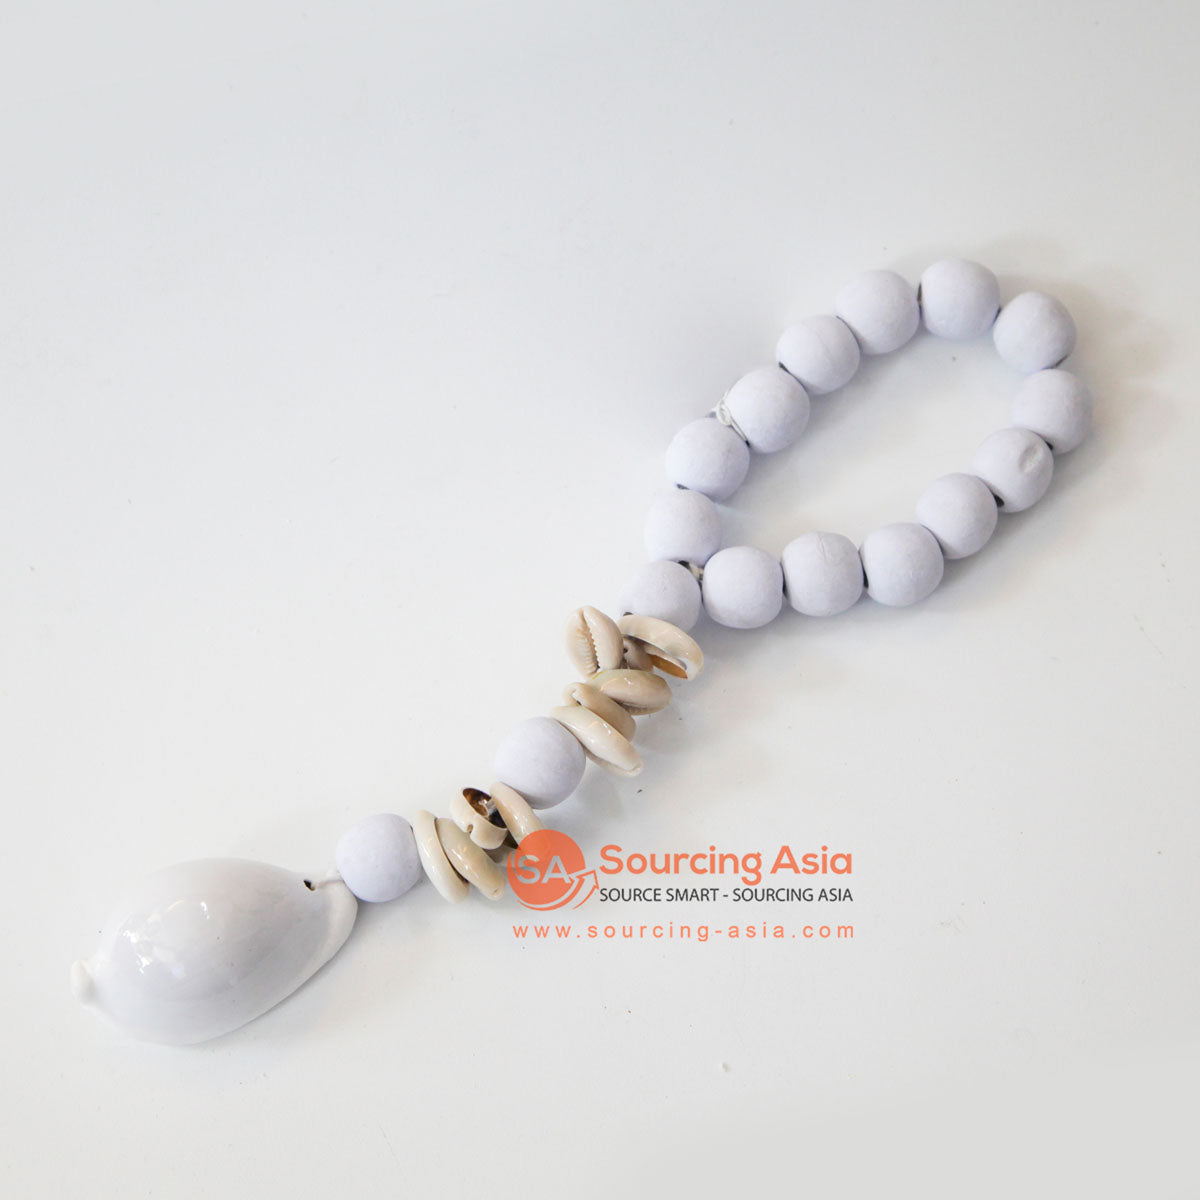 DHL159 WHITE TIMBER BEADS NECKLACE WALL DECORATION